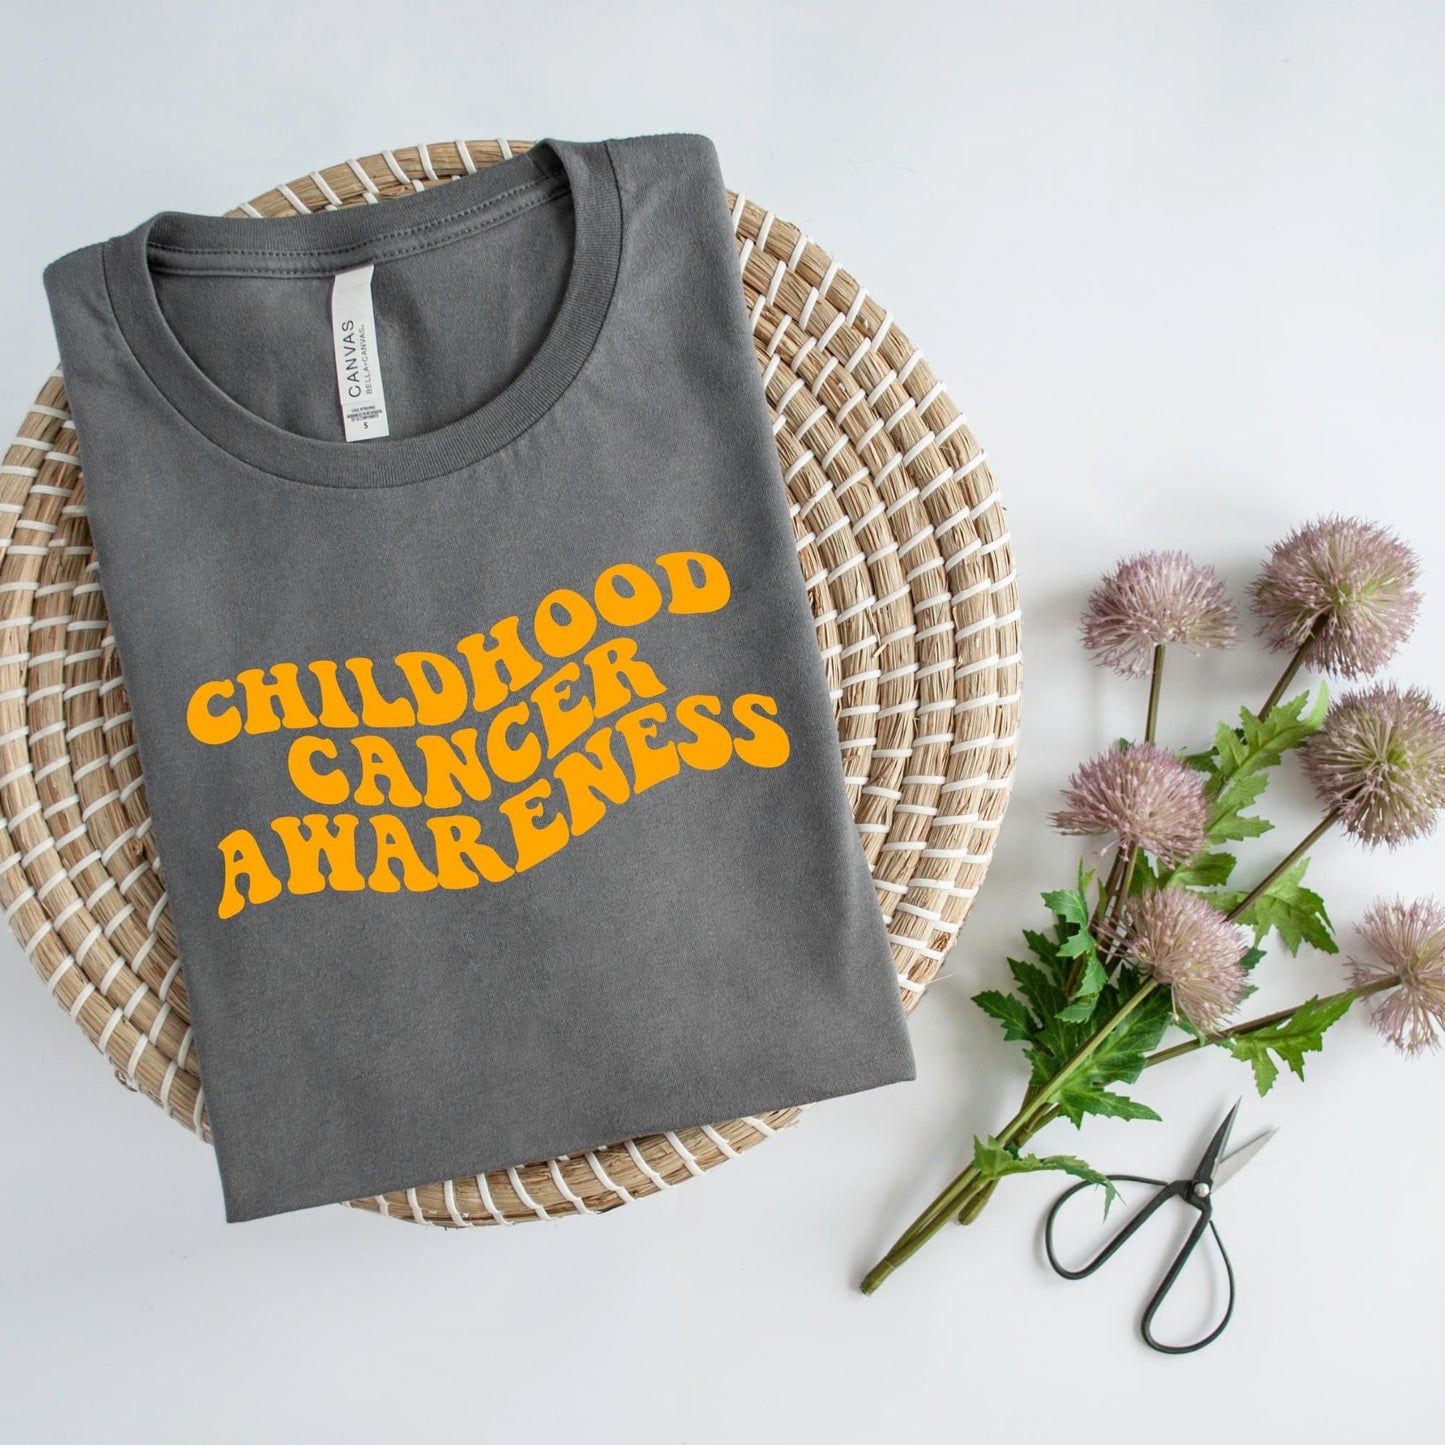 Childhood Cancer Awareness *Ollie & Co. Exclusive*